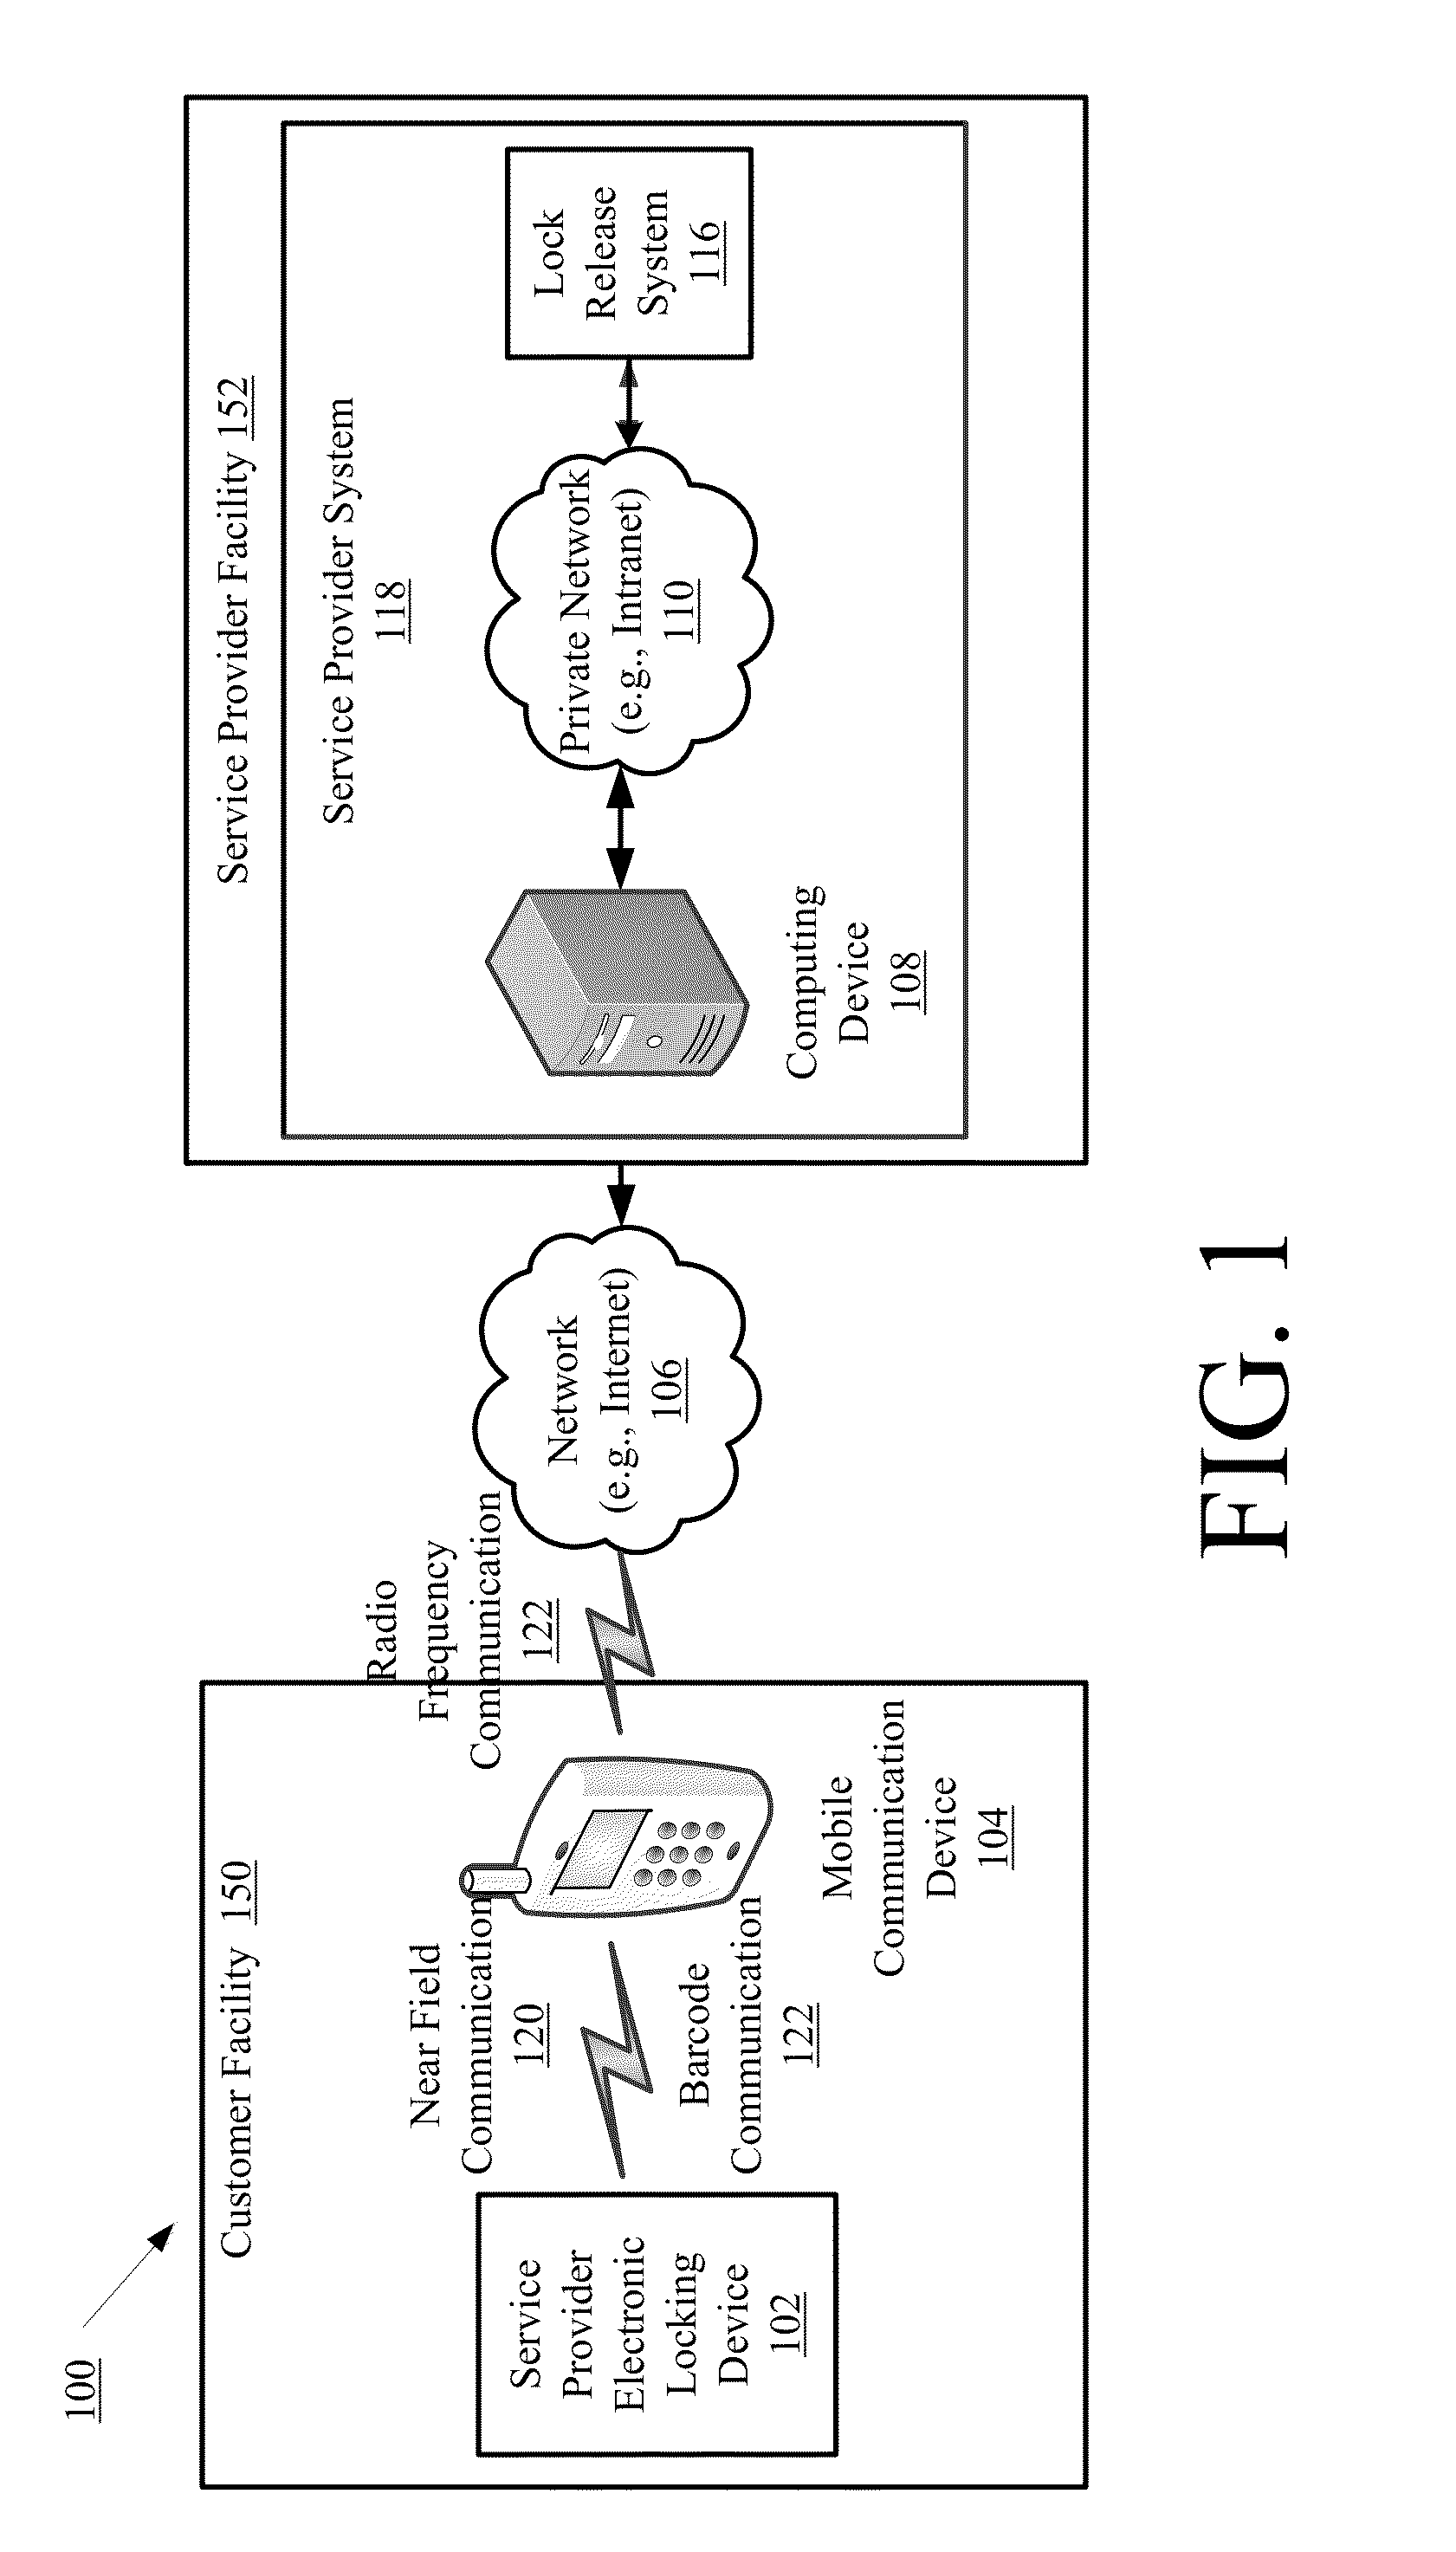 Access control using an electronic lock employing short range communication with mobile device